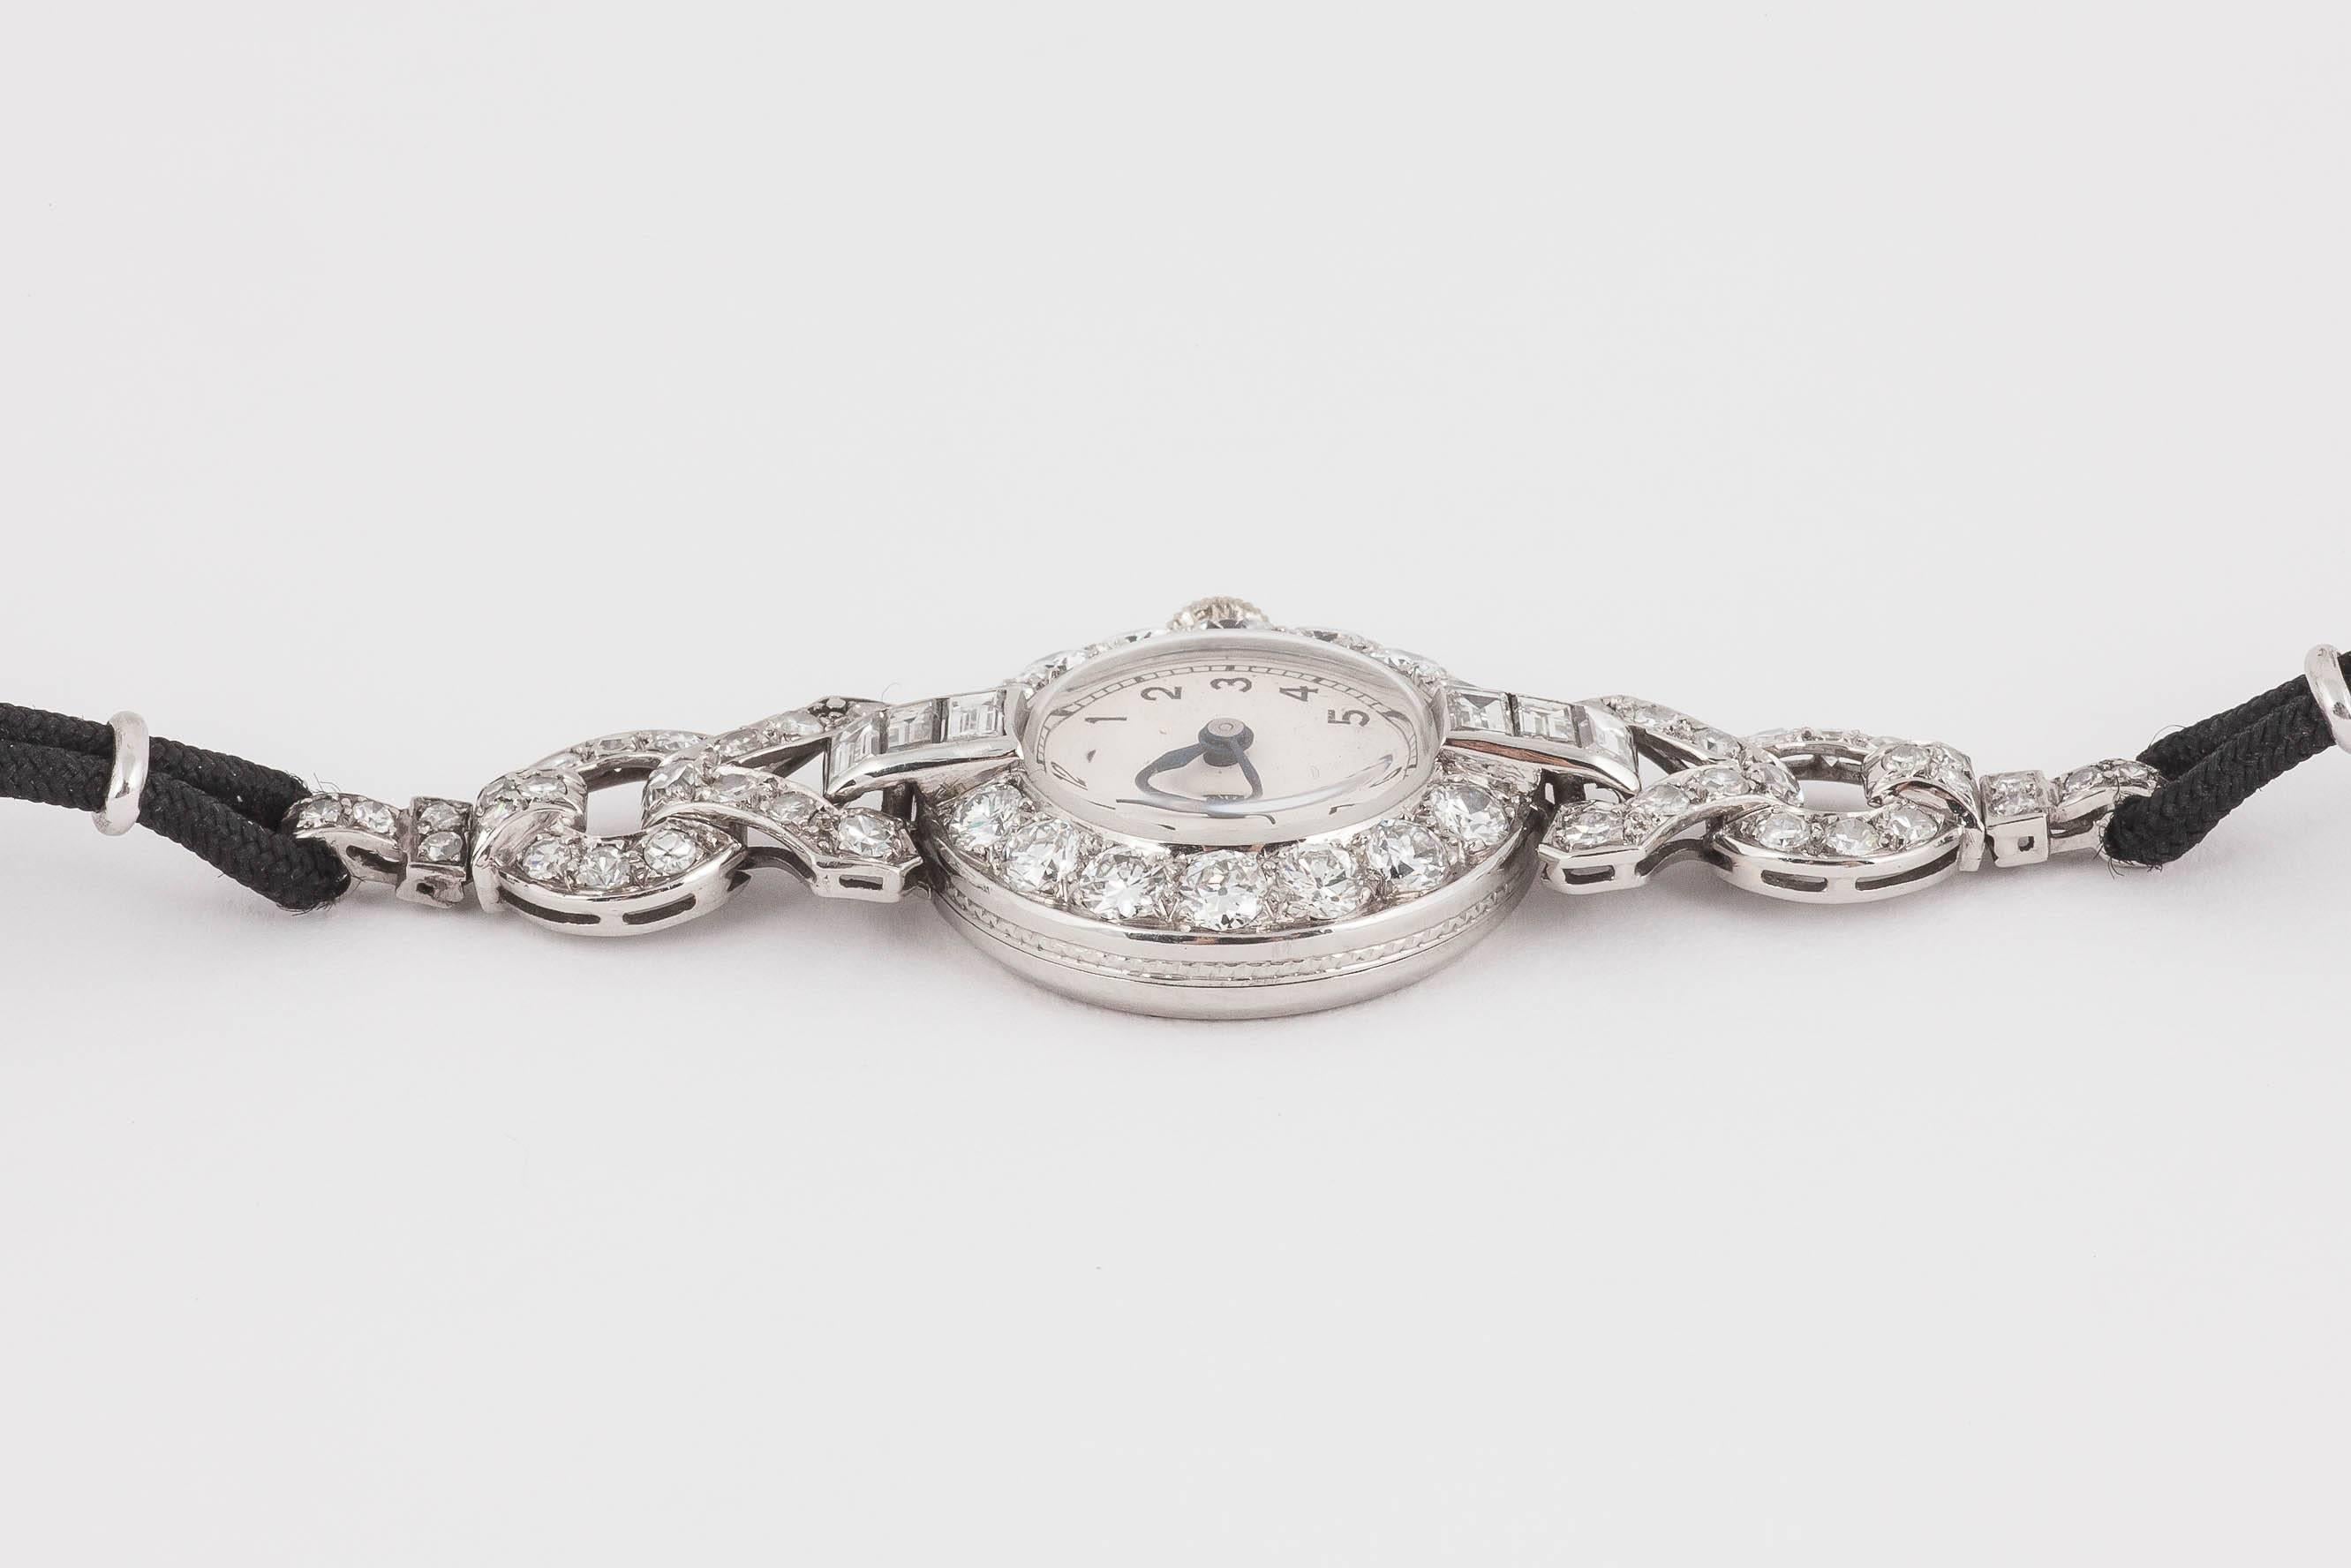 A 1920s ladies evening watch signed Tissot, set with old cut brilliant diamonds and baguette cut shoulders, mounted in platinum. 17 jewelled lever movement [54 diamonds], good colour and clarity, approximately 2.5 carats.  Numbered 7018 on reverse. 